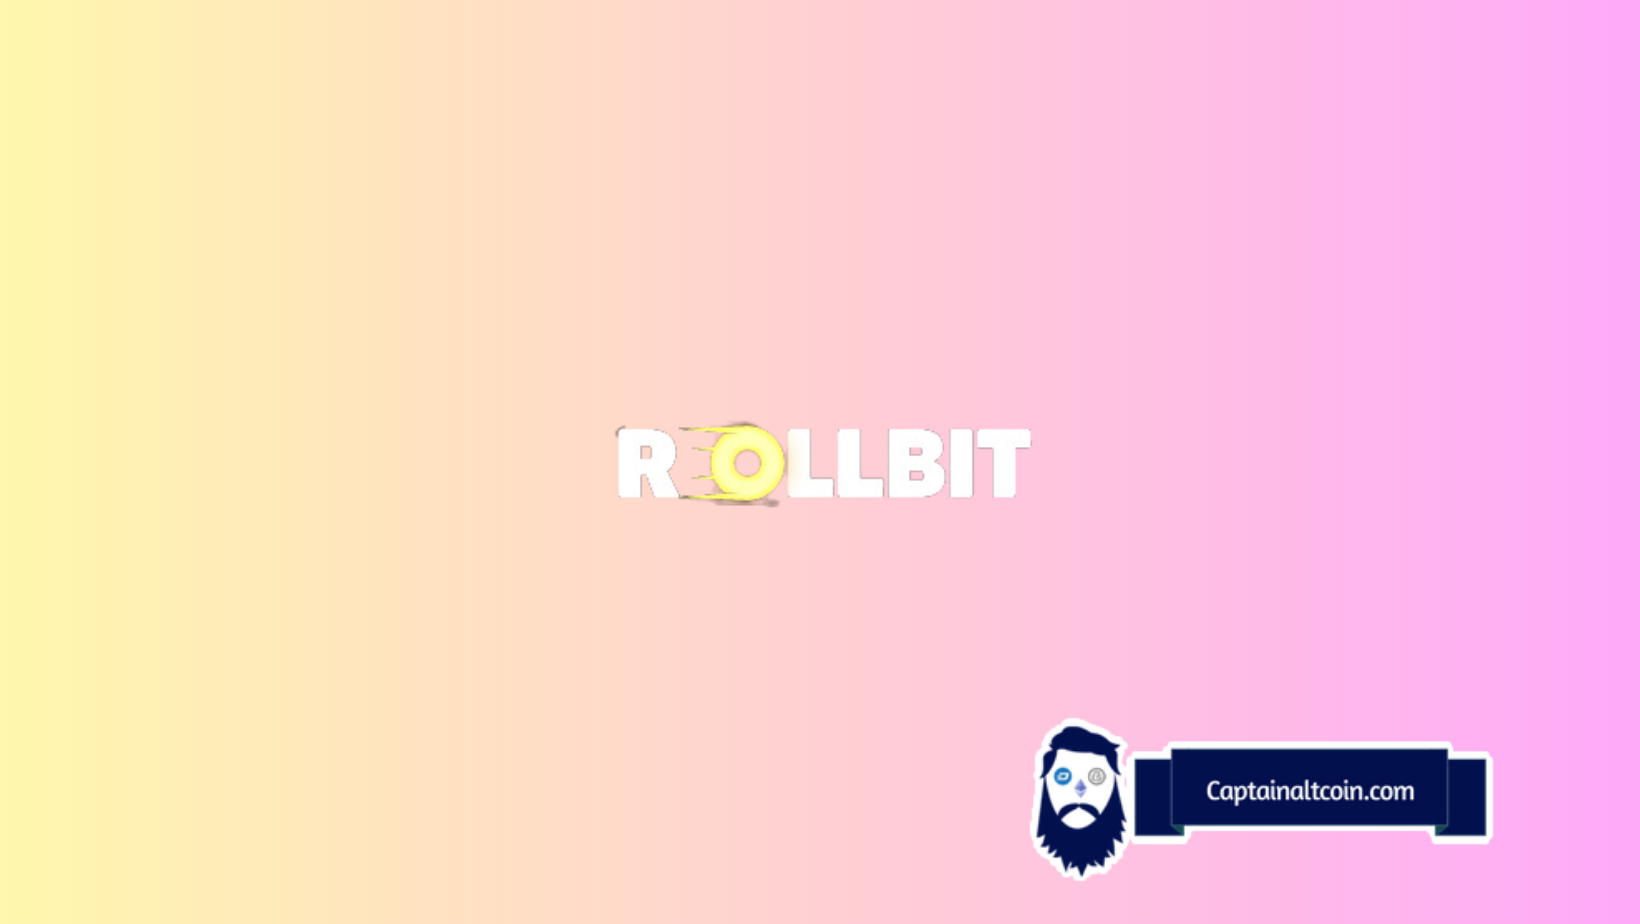 Unethical Allure: The Controversial Sponsorship Deals of Rollbit Casino